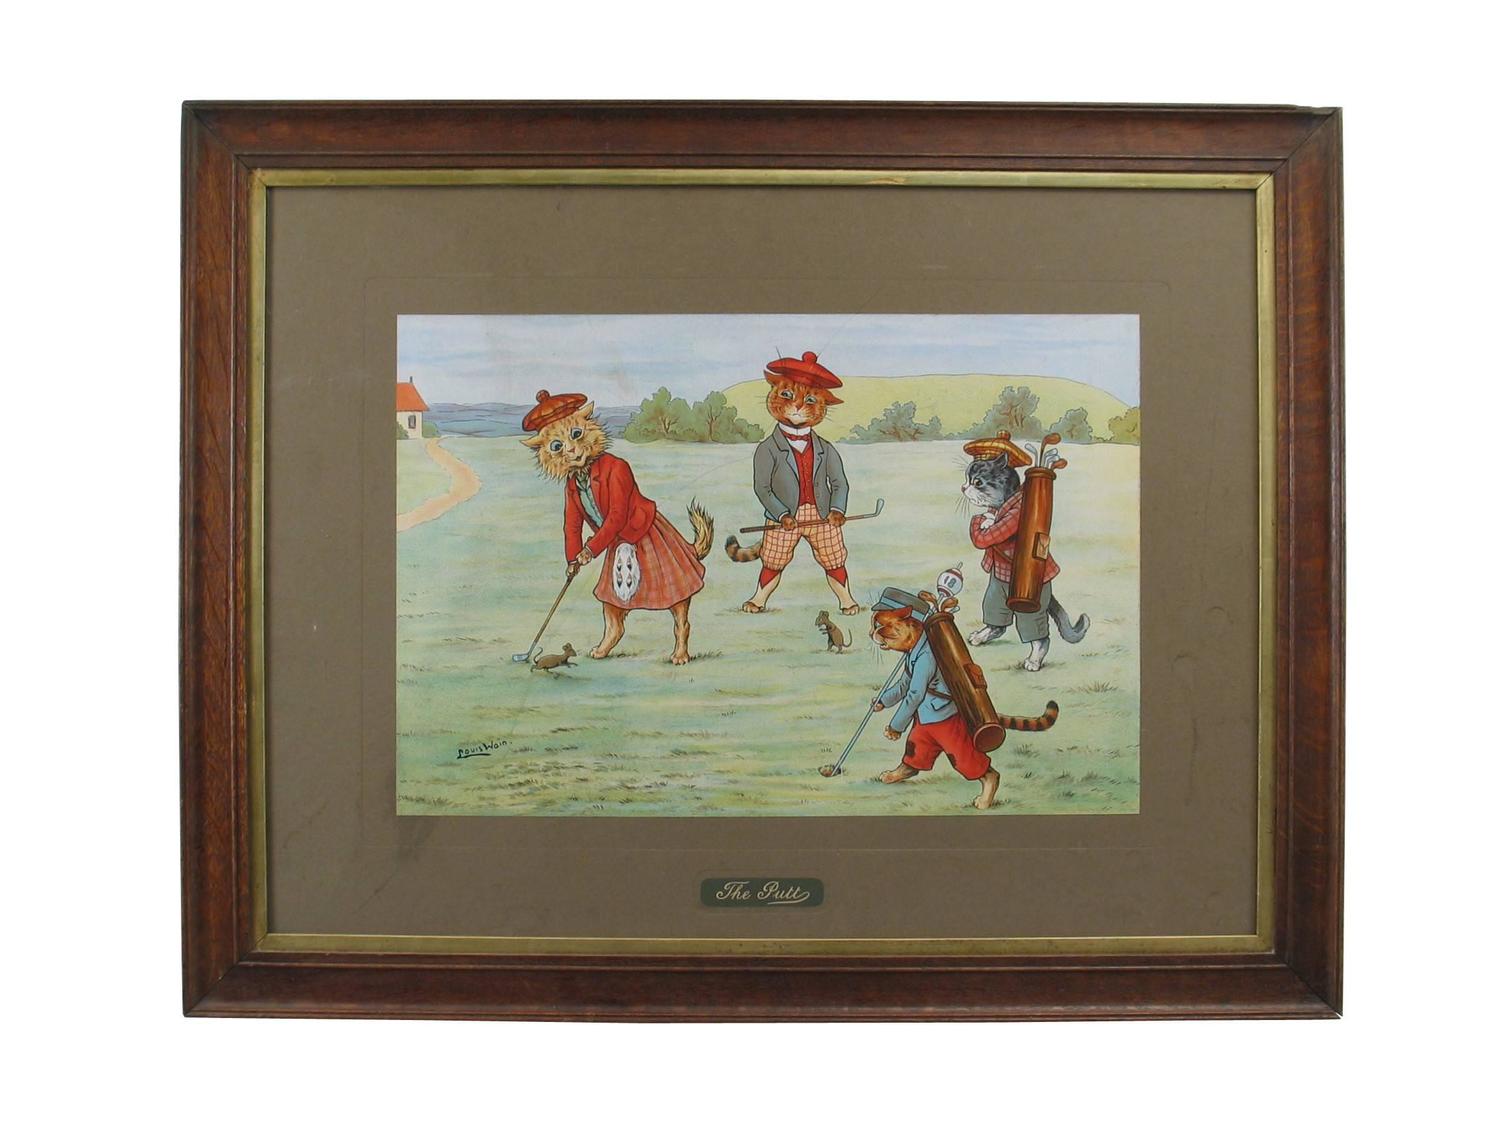 Cats Playing Golf, Pair of Humorous Golf Prints For Sale at 1stdibs